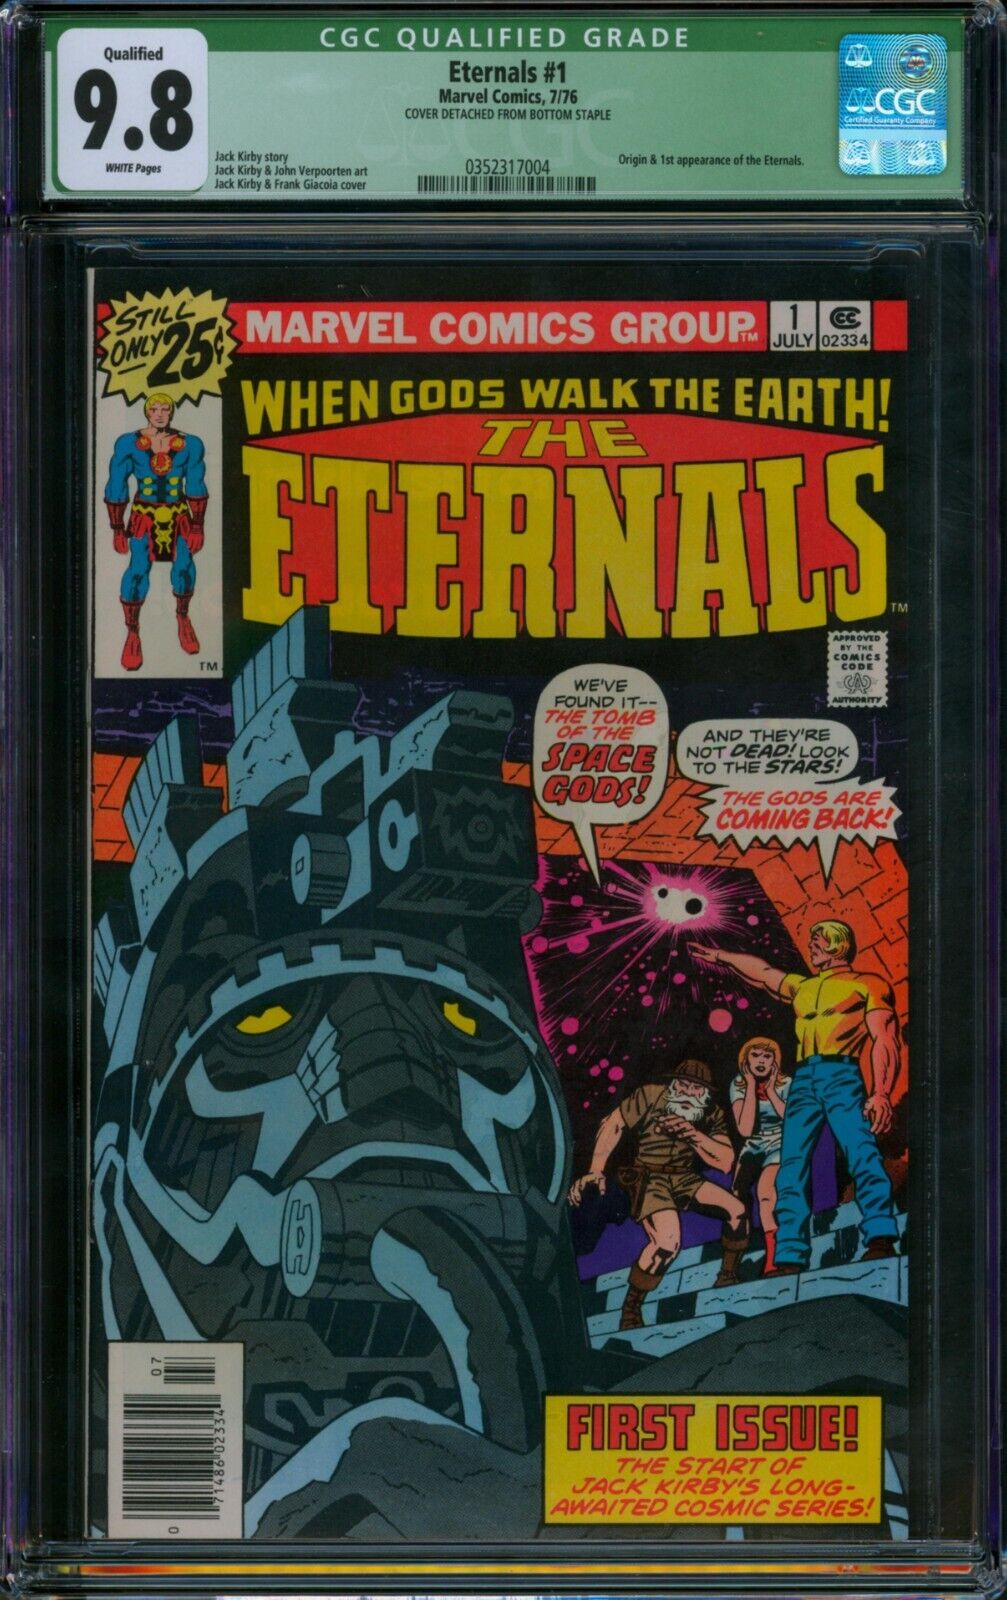 THE ETERNALS #1 ⭐ CGC 9.8 Qualified ⭐ 1st App Jack Kirby Marvel Comic 1976